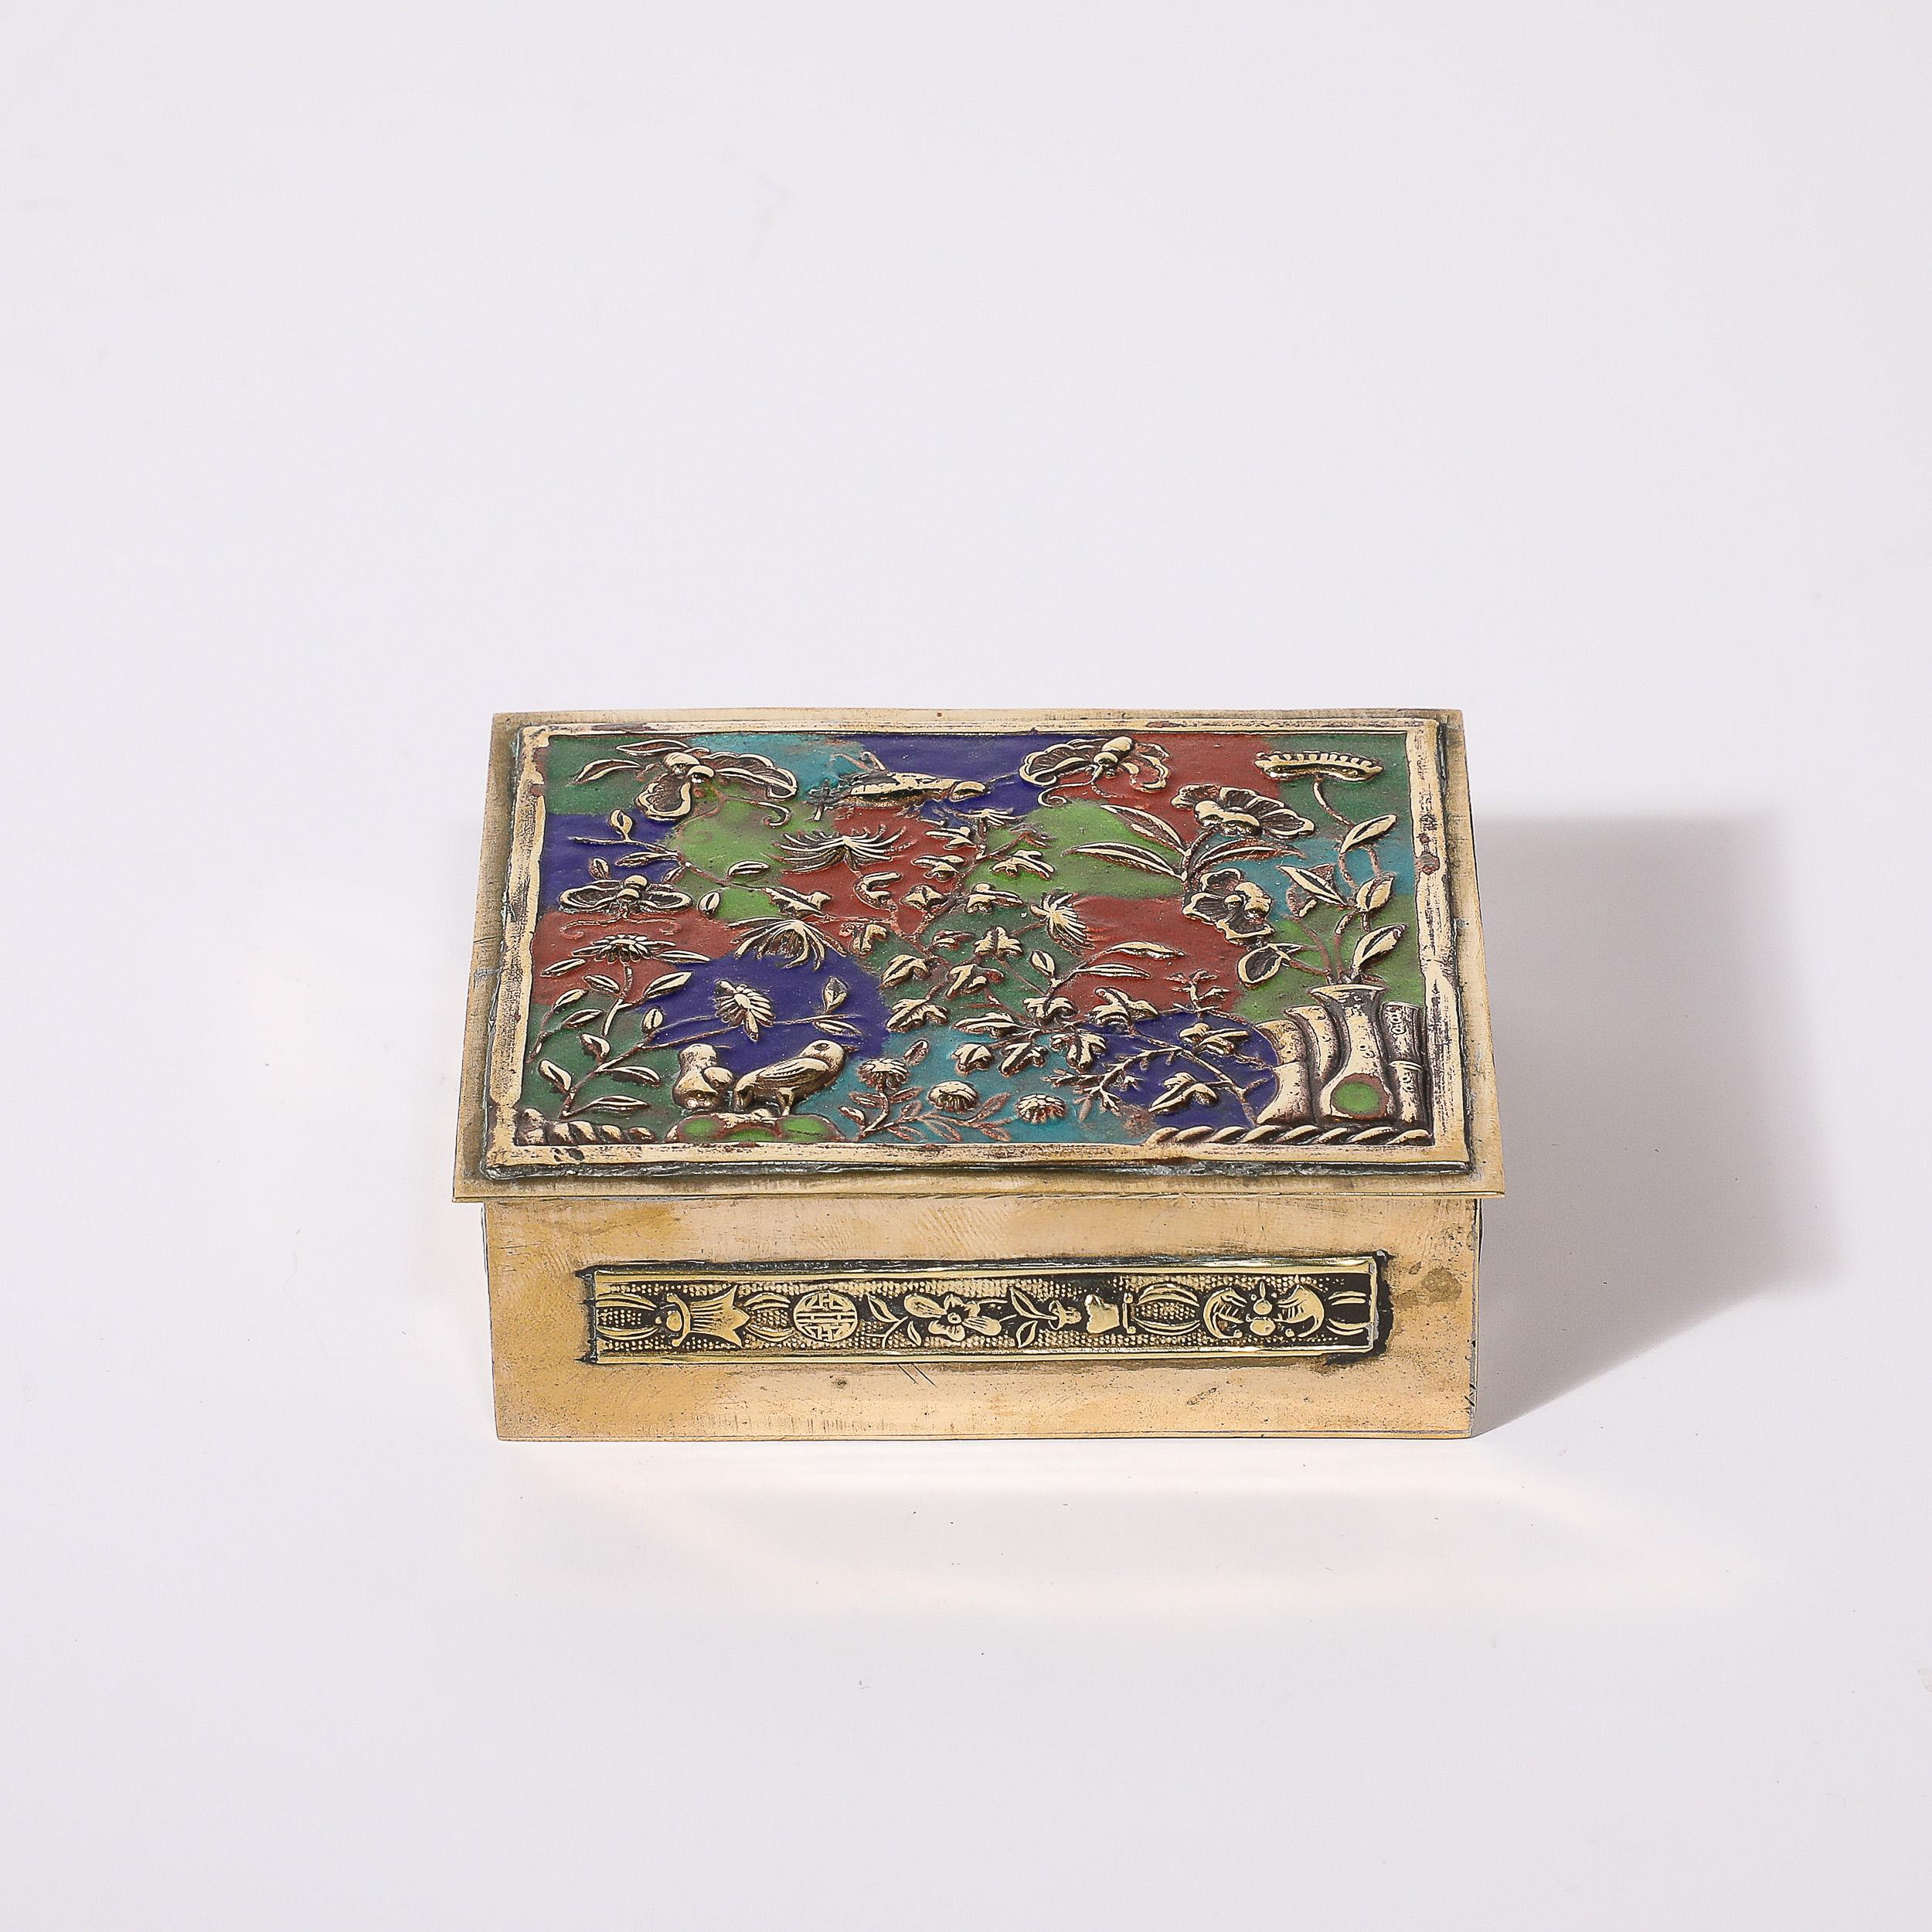 Art Deco Brass and Enamel Box W/ Naturalist Imagery in Relief Cloisonne In Excellent Condition For Sale In New York, NY